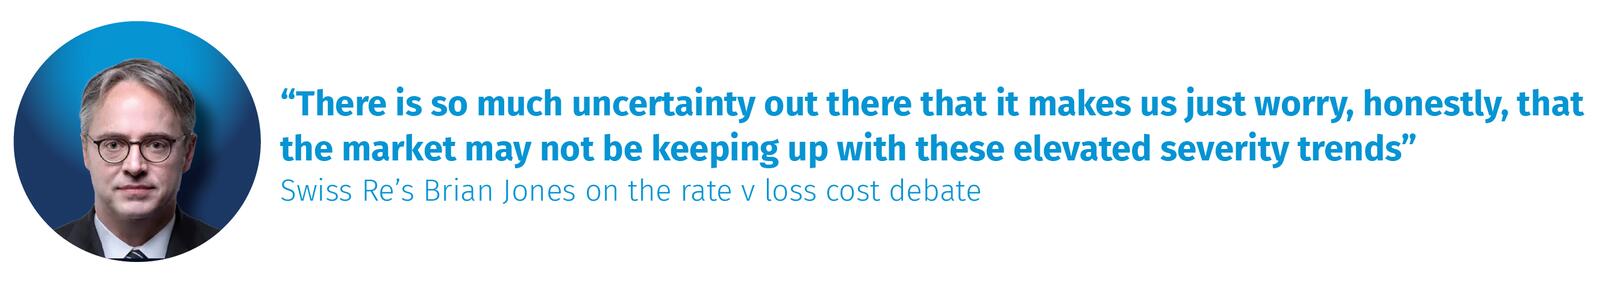 Swiss Re’s Brian Jones on the rate v loss cost debate